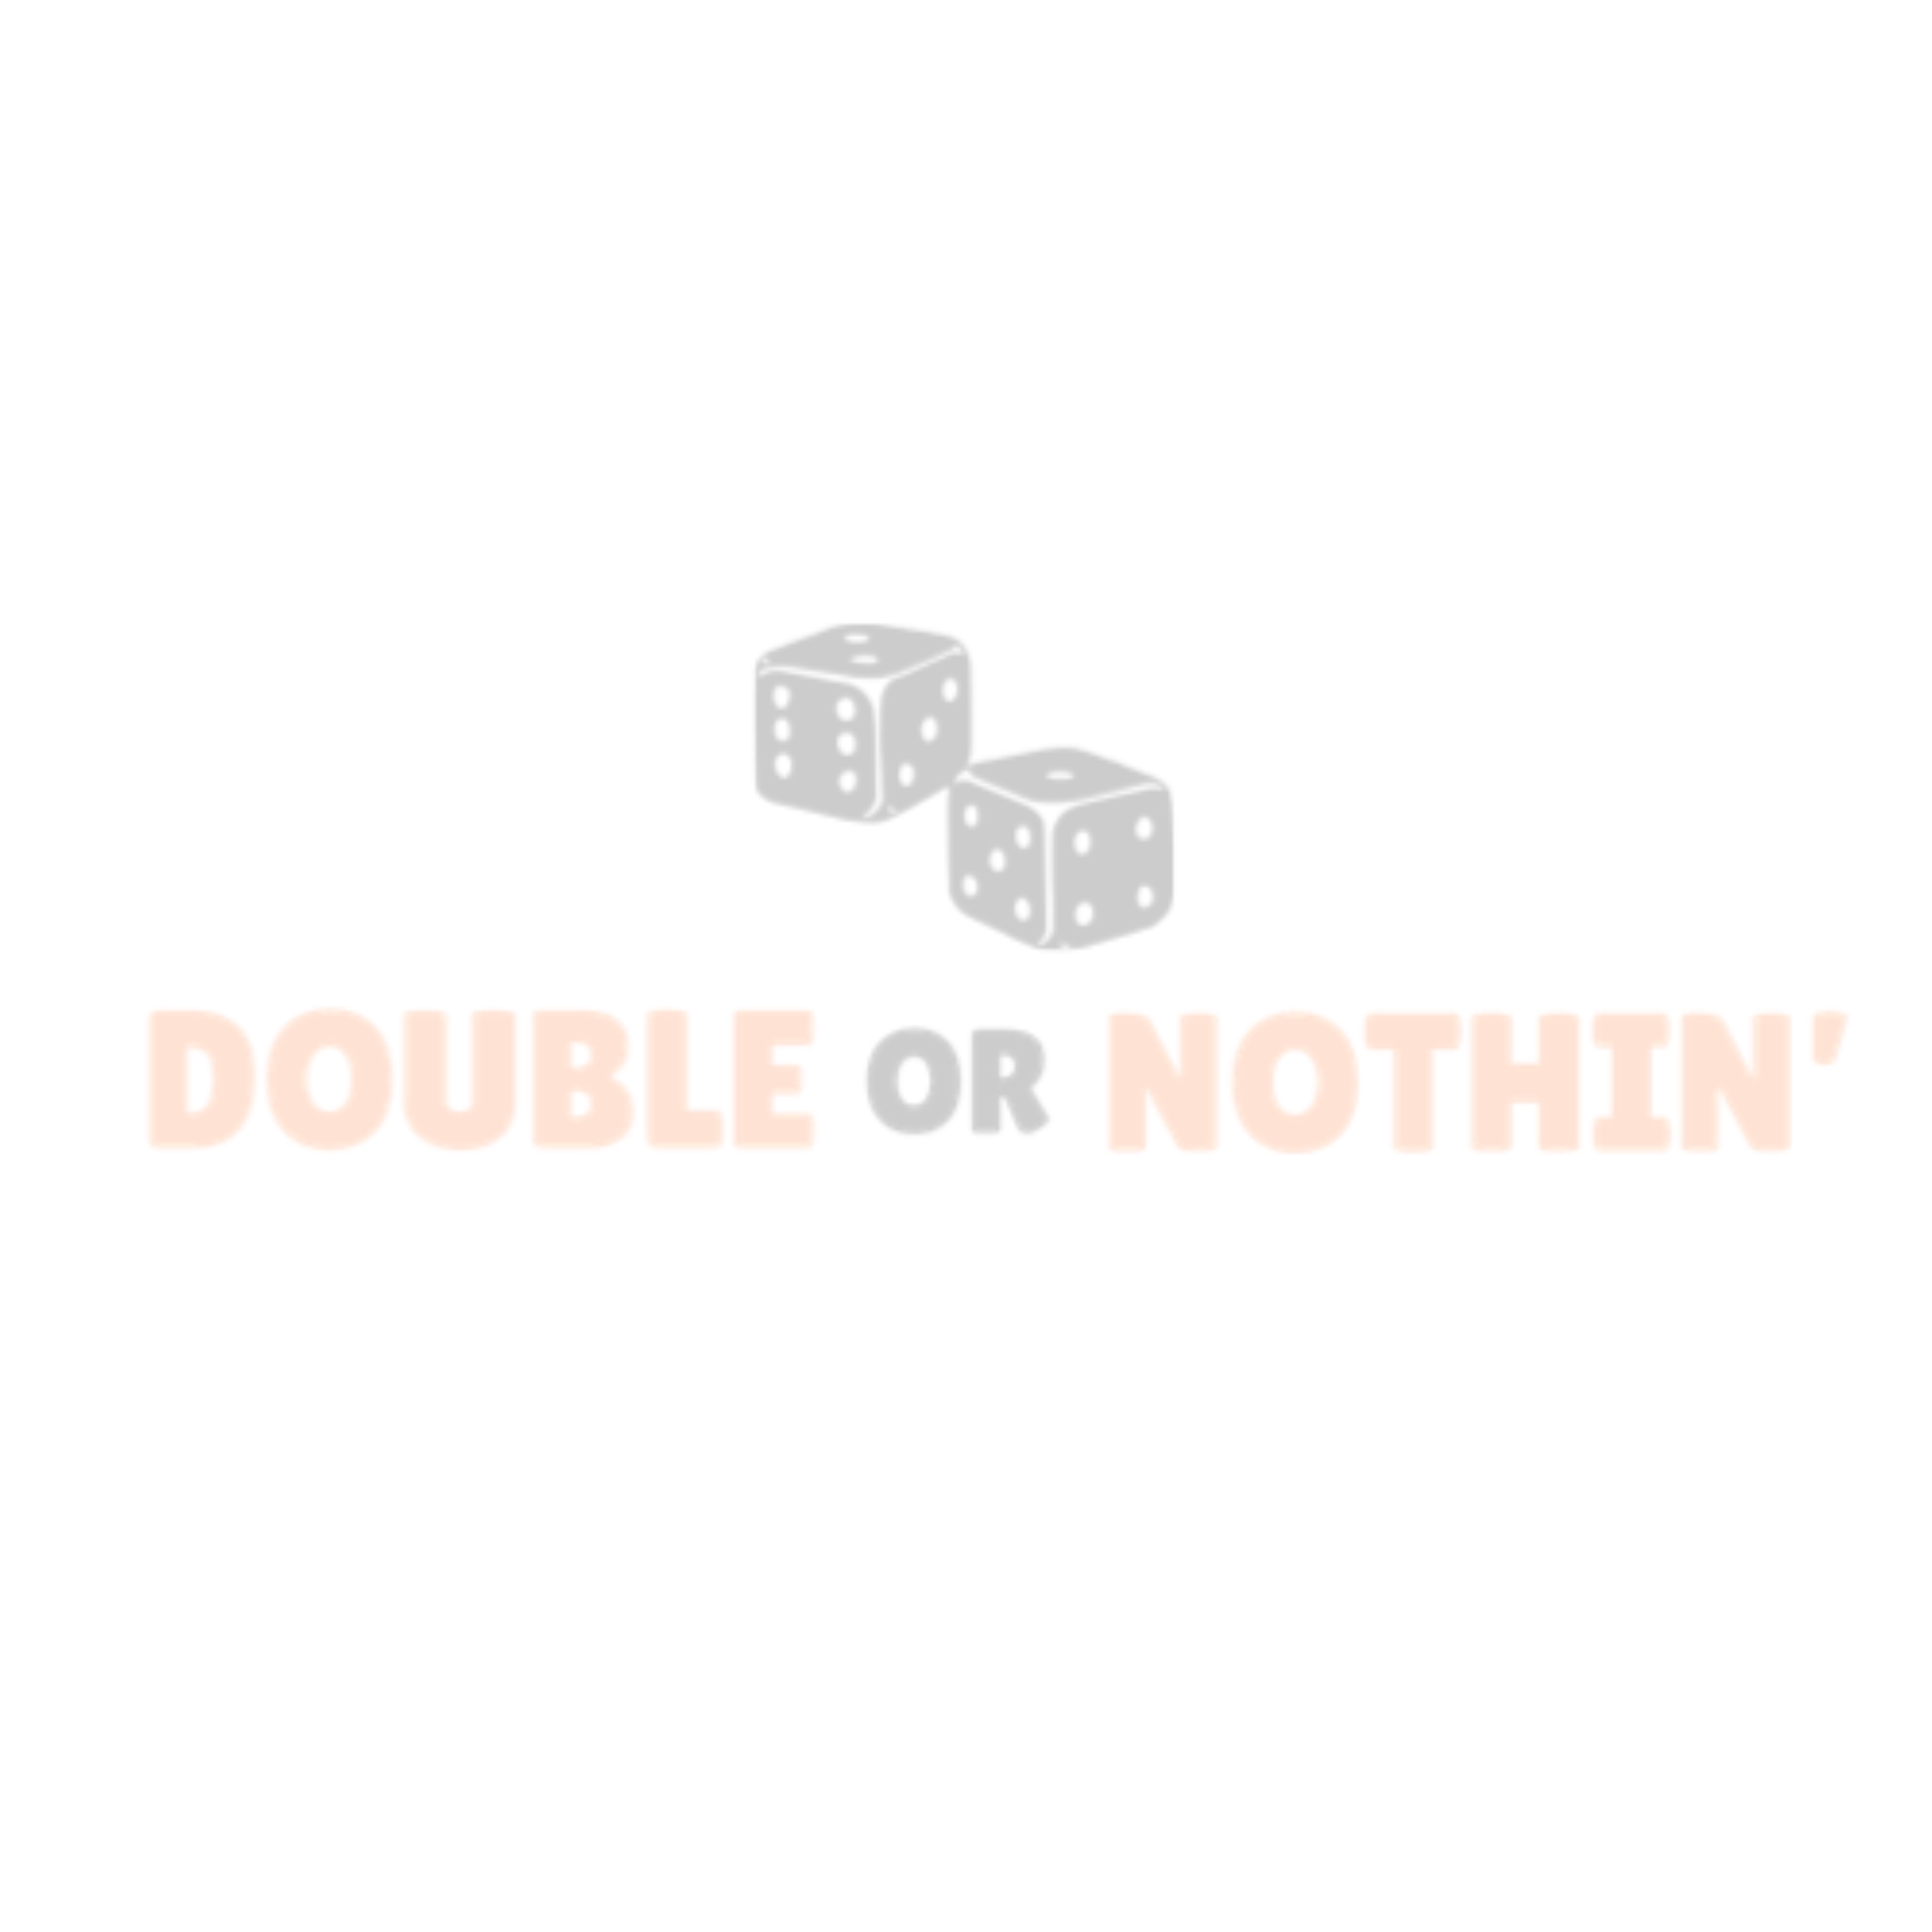 Double or Nothing cover logo